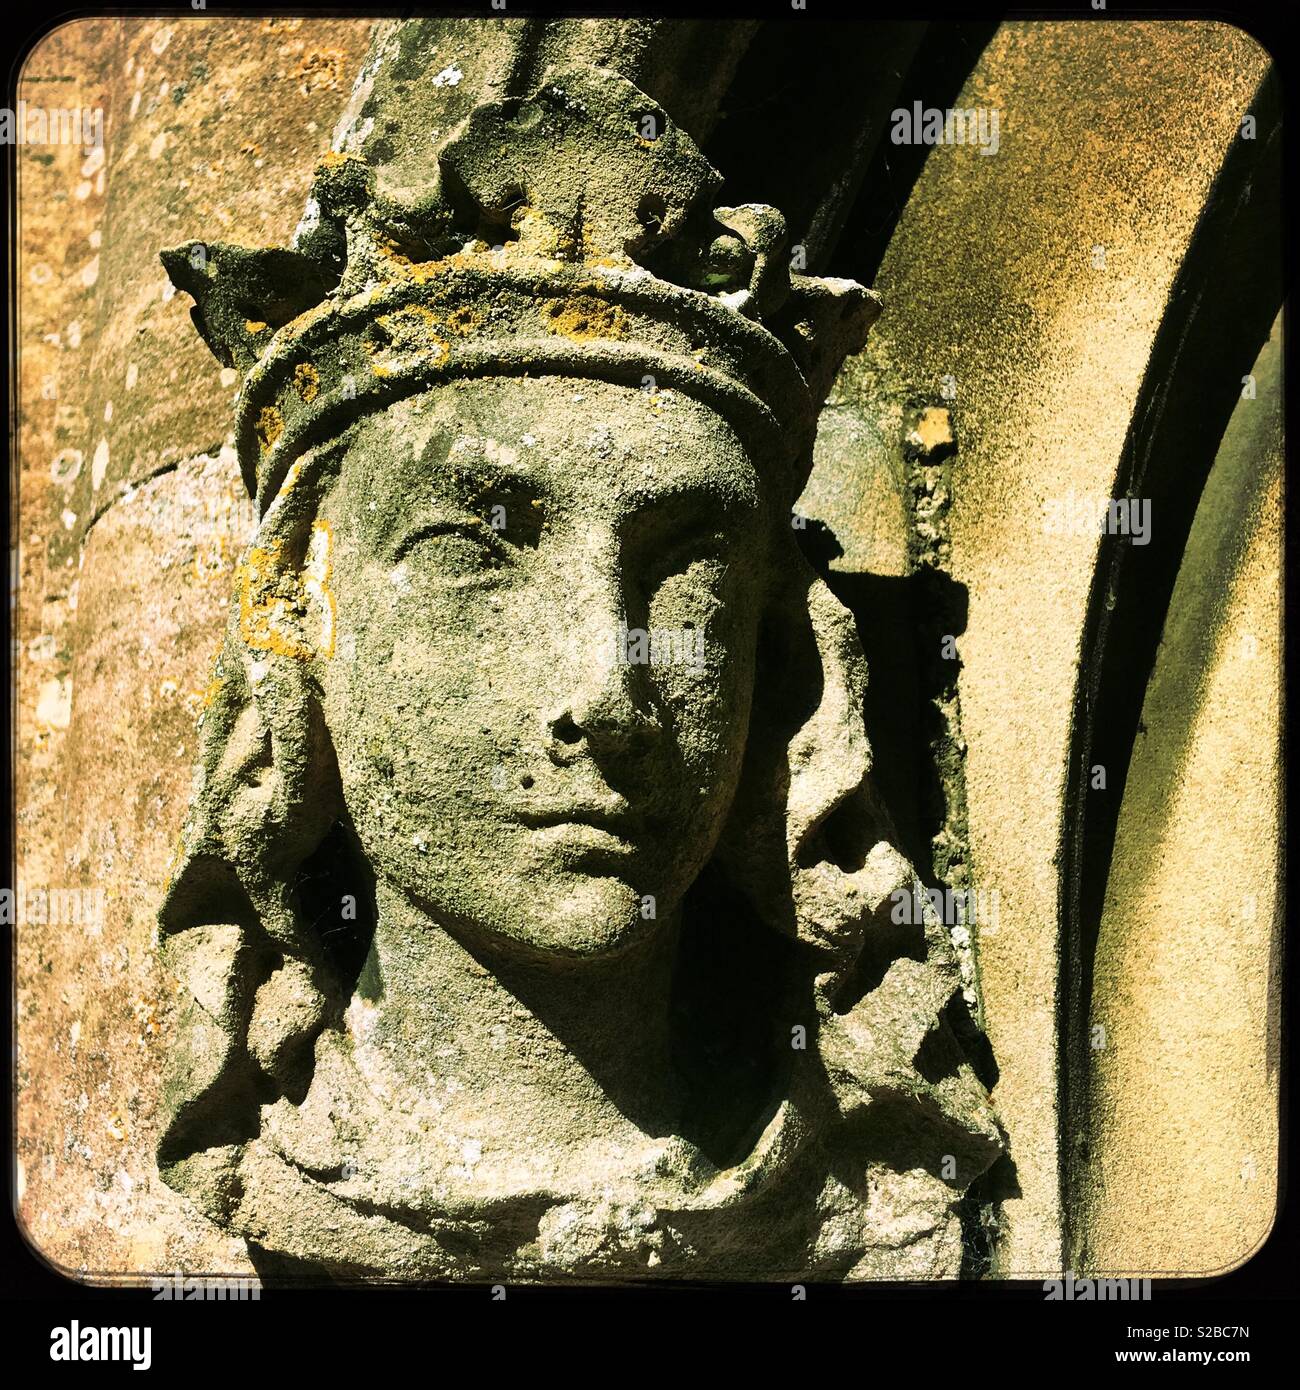 Carved stone head at St Peter’s church, North Rauceby, Lincolnshire, UK. Stock Photo